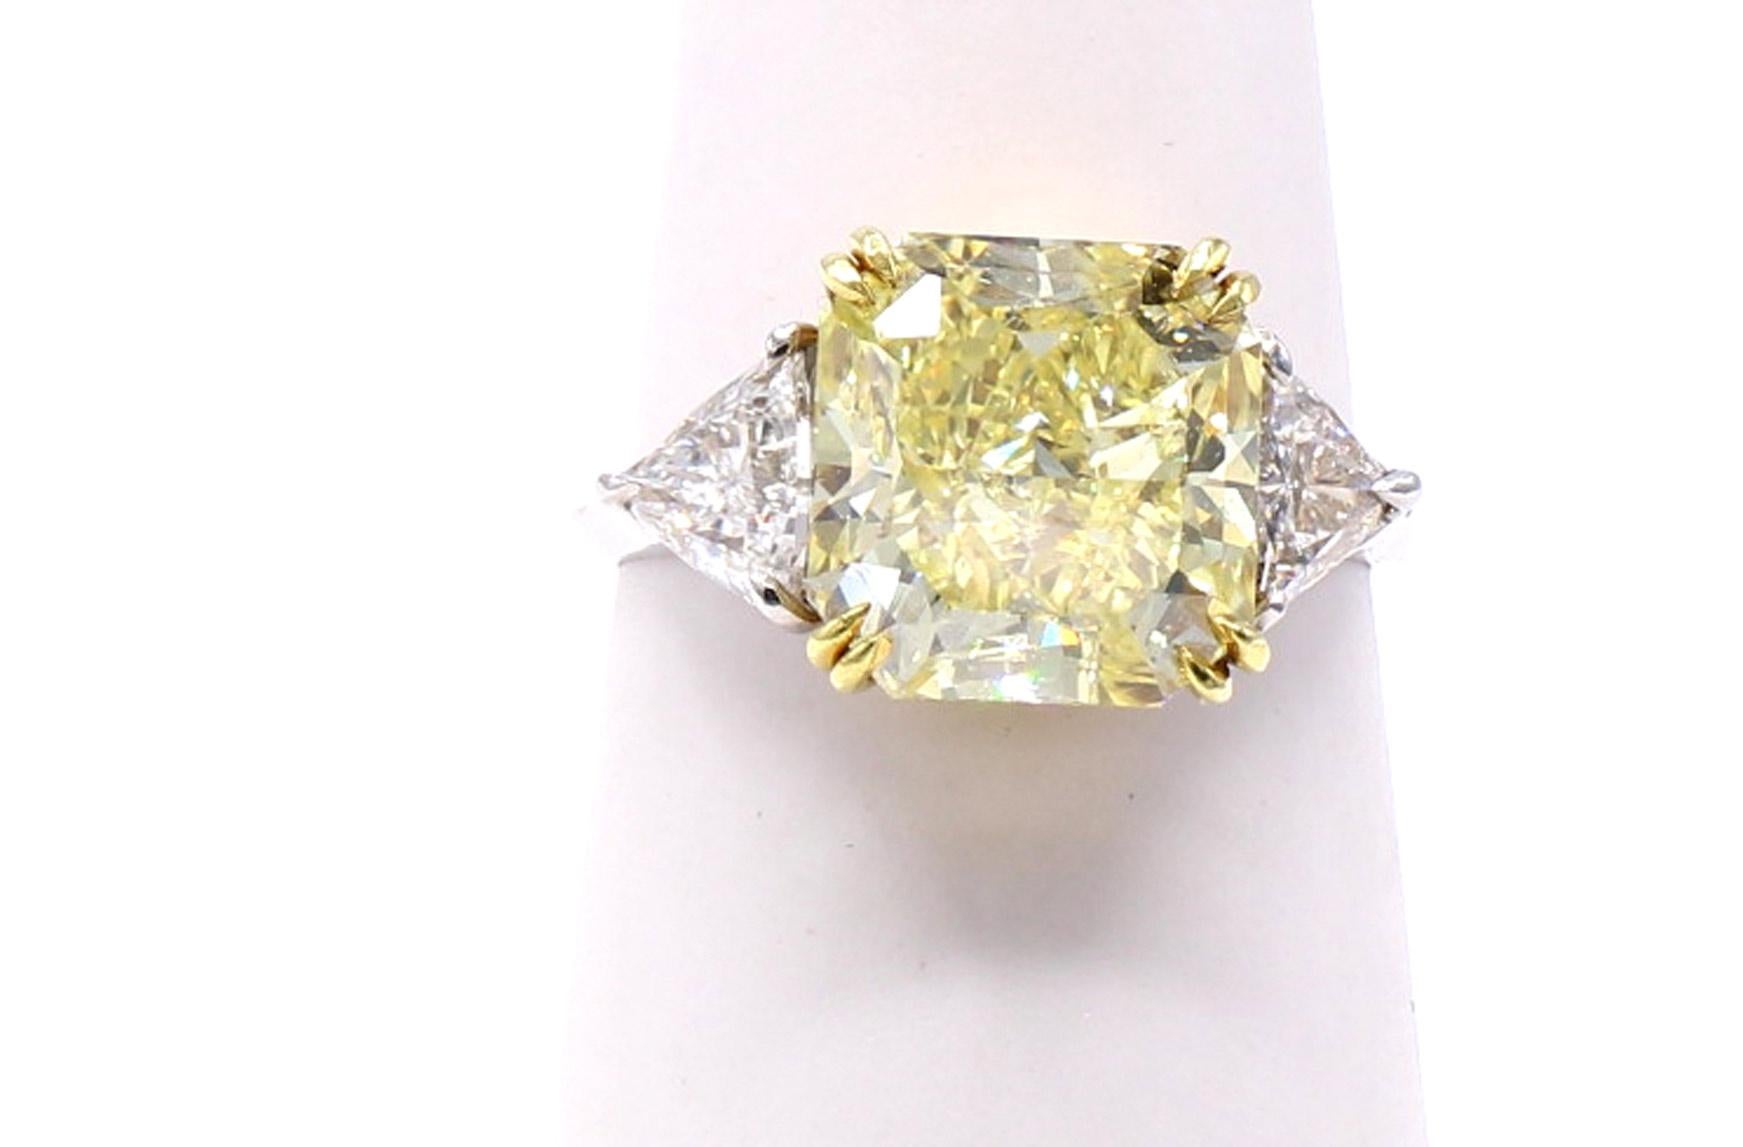 A gorgeous Natural Fancy Intense Yellow radiant cut diamond weighing 5.03 carats is the center piece of this lovely engagement ring. Accompanied by a report from the GIA giving this diamond a clarity grade of VS2 and an even color distribution, the